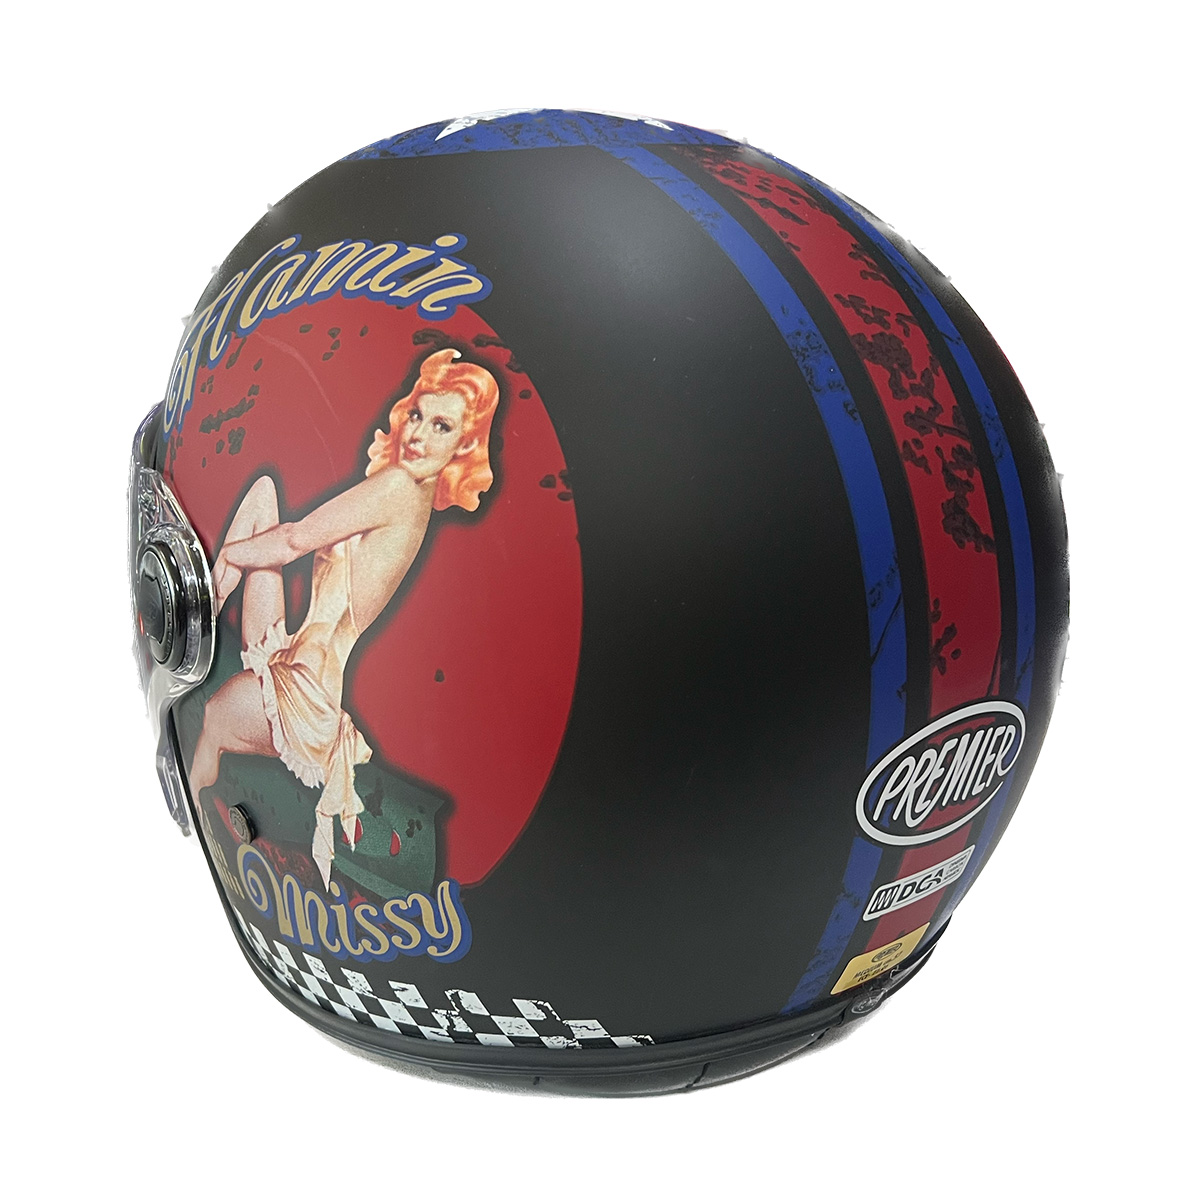 Casco jet Premier Vangarde Pin Up Limited Edition 22.06